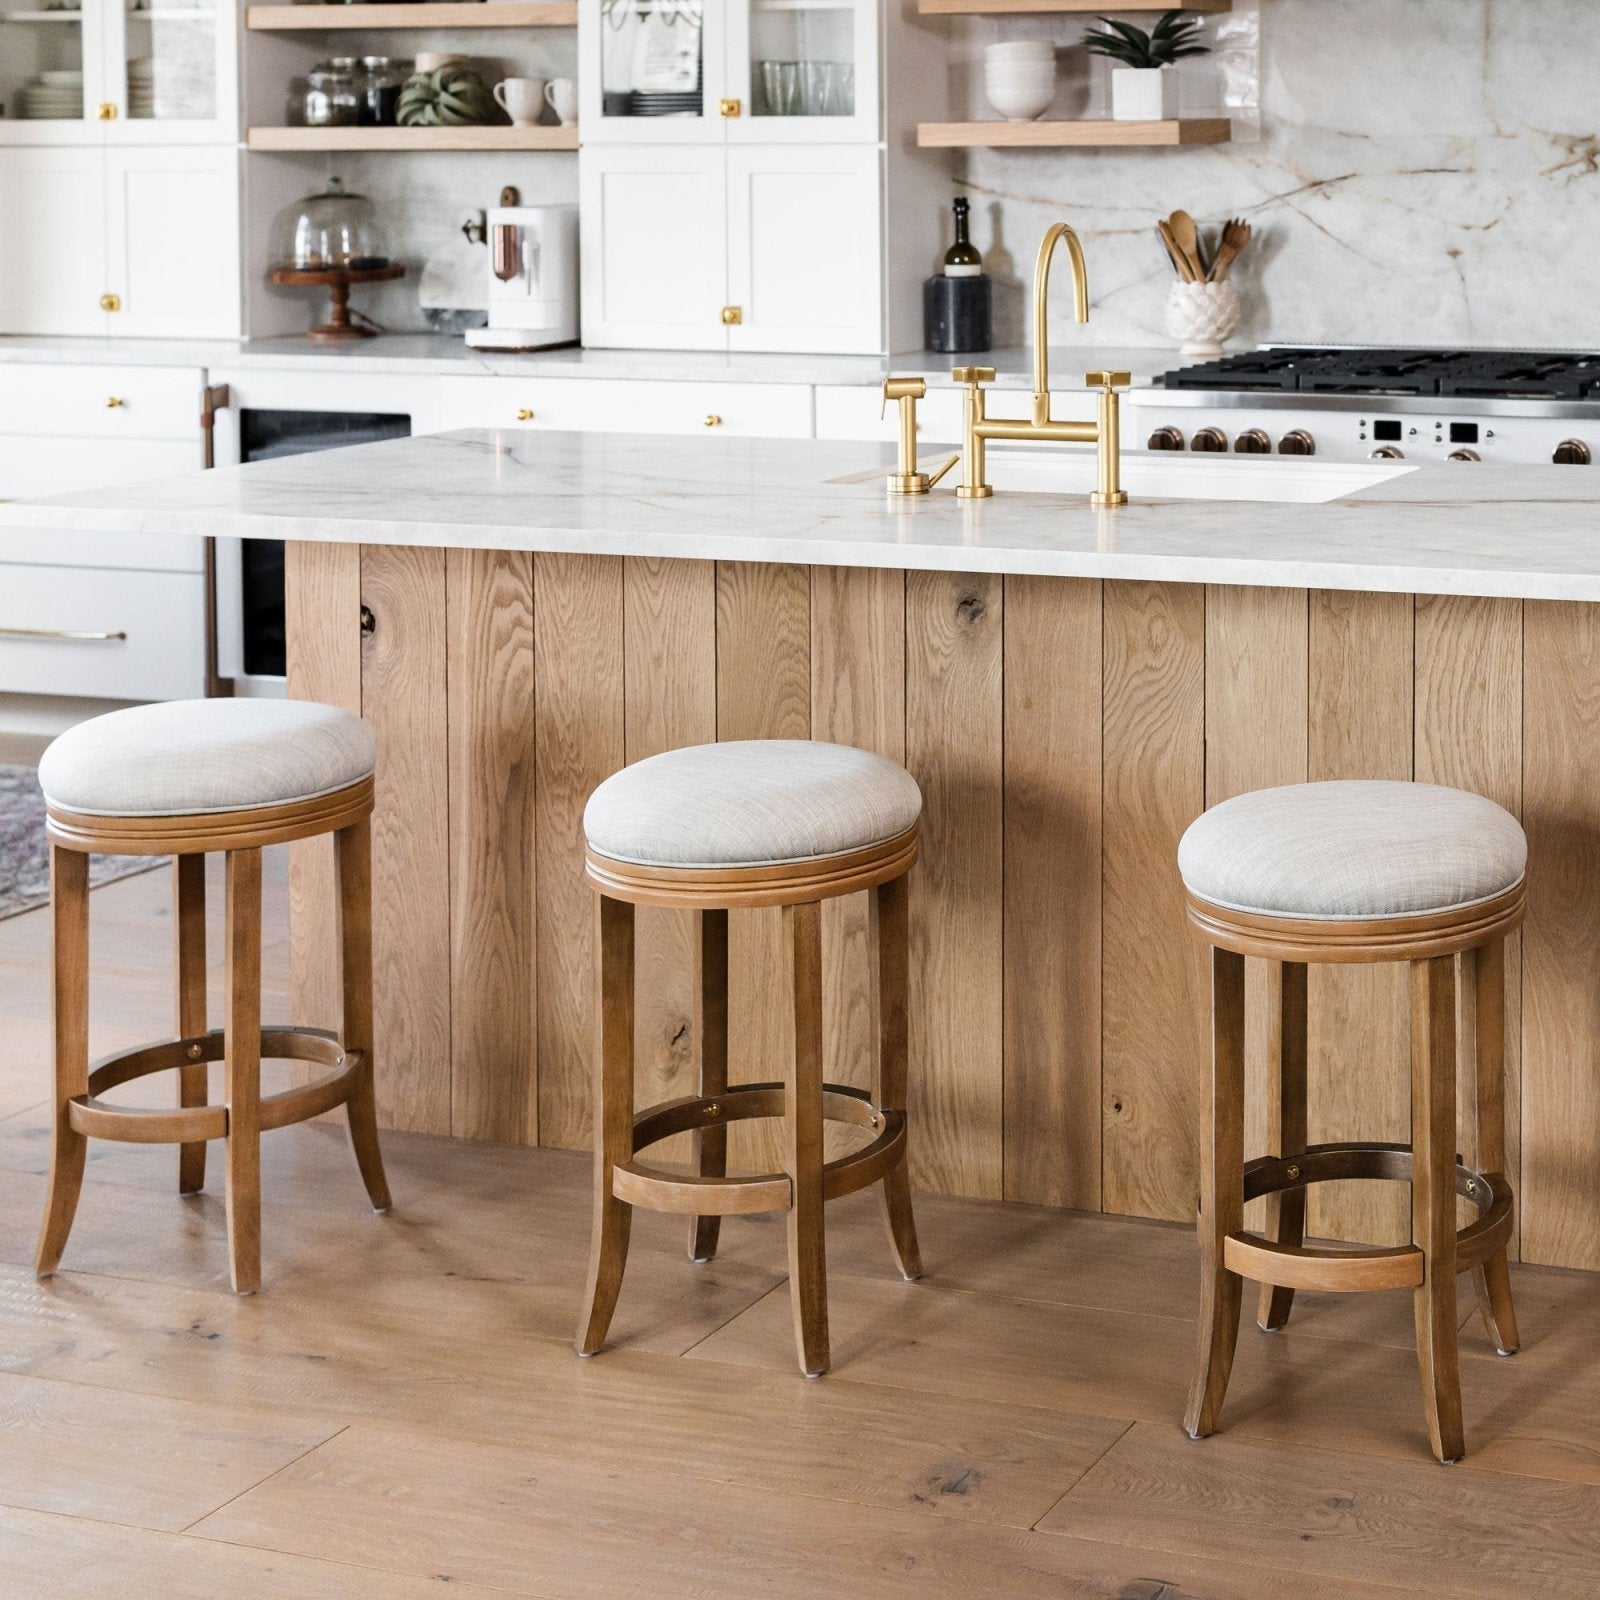 Eva Bar Stool in Weathered Oak Finish with Sand Color Fabric Upholstery in Stools by Maven Lane